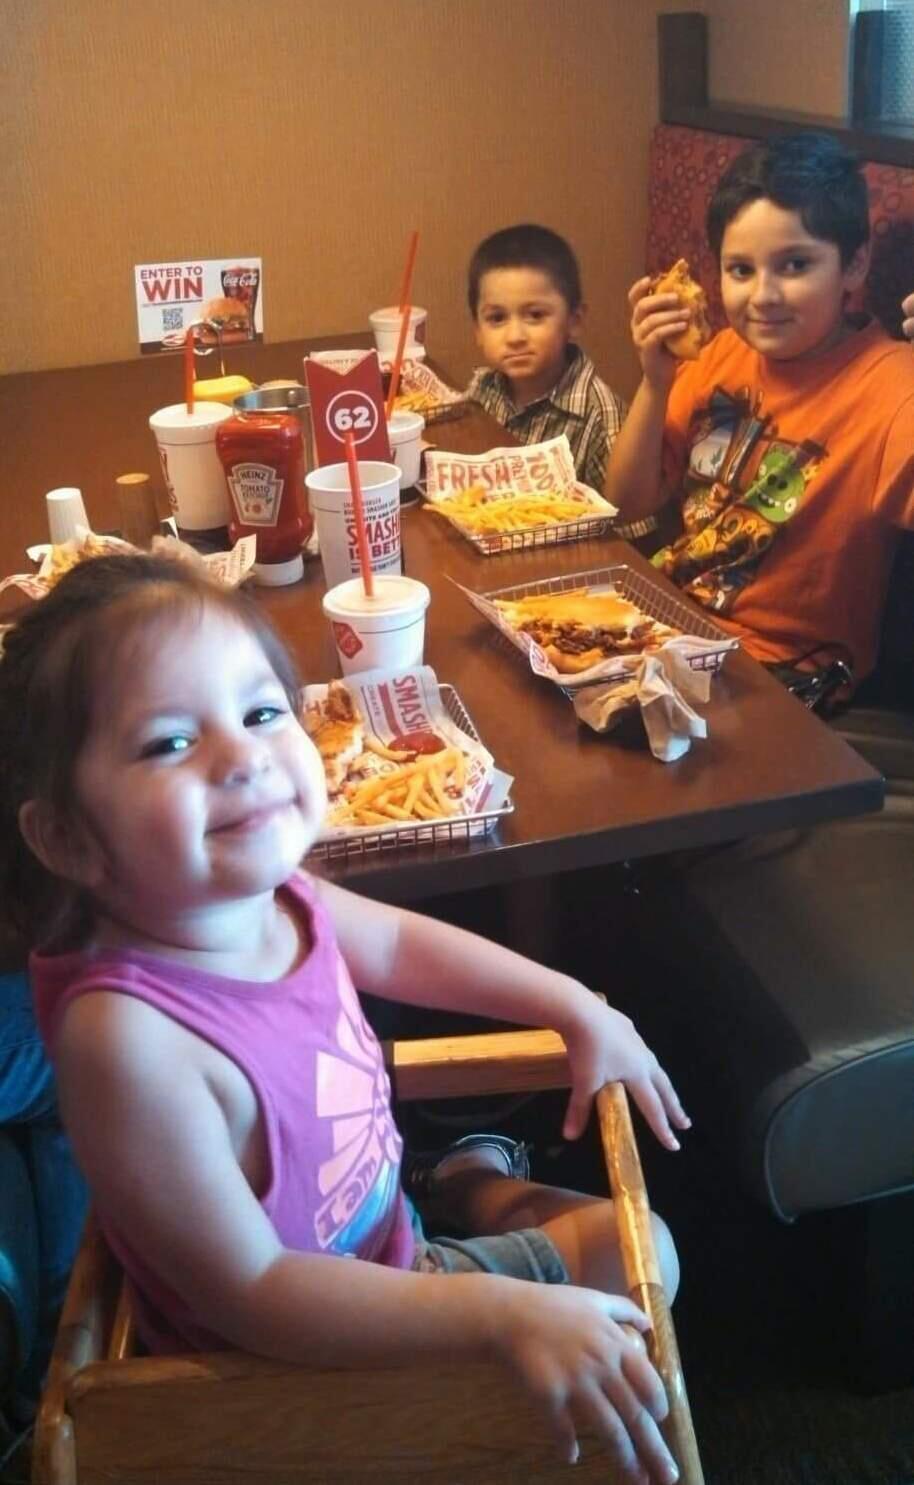 This 2014 photo provided by Virginia Saldivar shows her grandchildren Daisy, from left, Xavier and Dominic Saldivar, three of the four children presumed dead after their van sank into Greens Bayou on Houston's eastside. Virginia Saldivar says she presumes six members of a family, including four of her grandchildren, have died after their van was carried by a strong current into the bayou and sank. (Virginia Saldivar via AP)